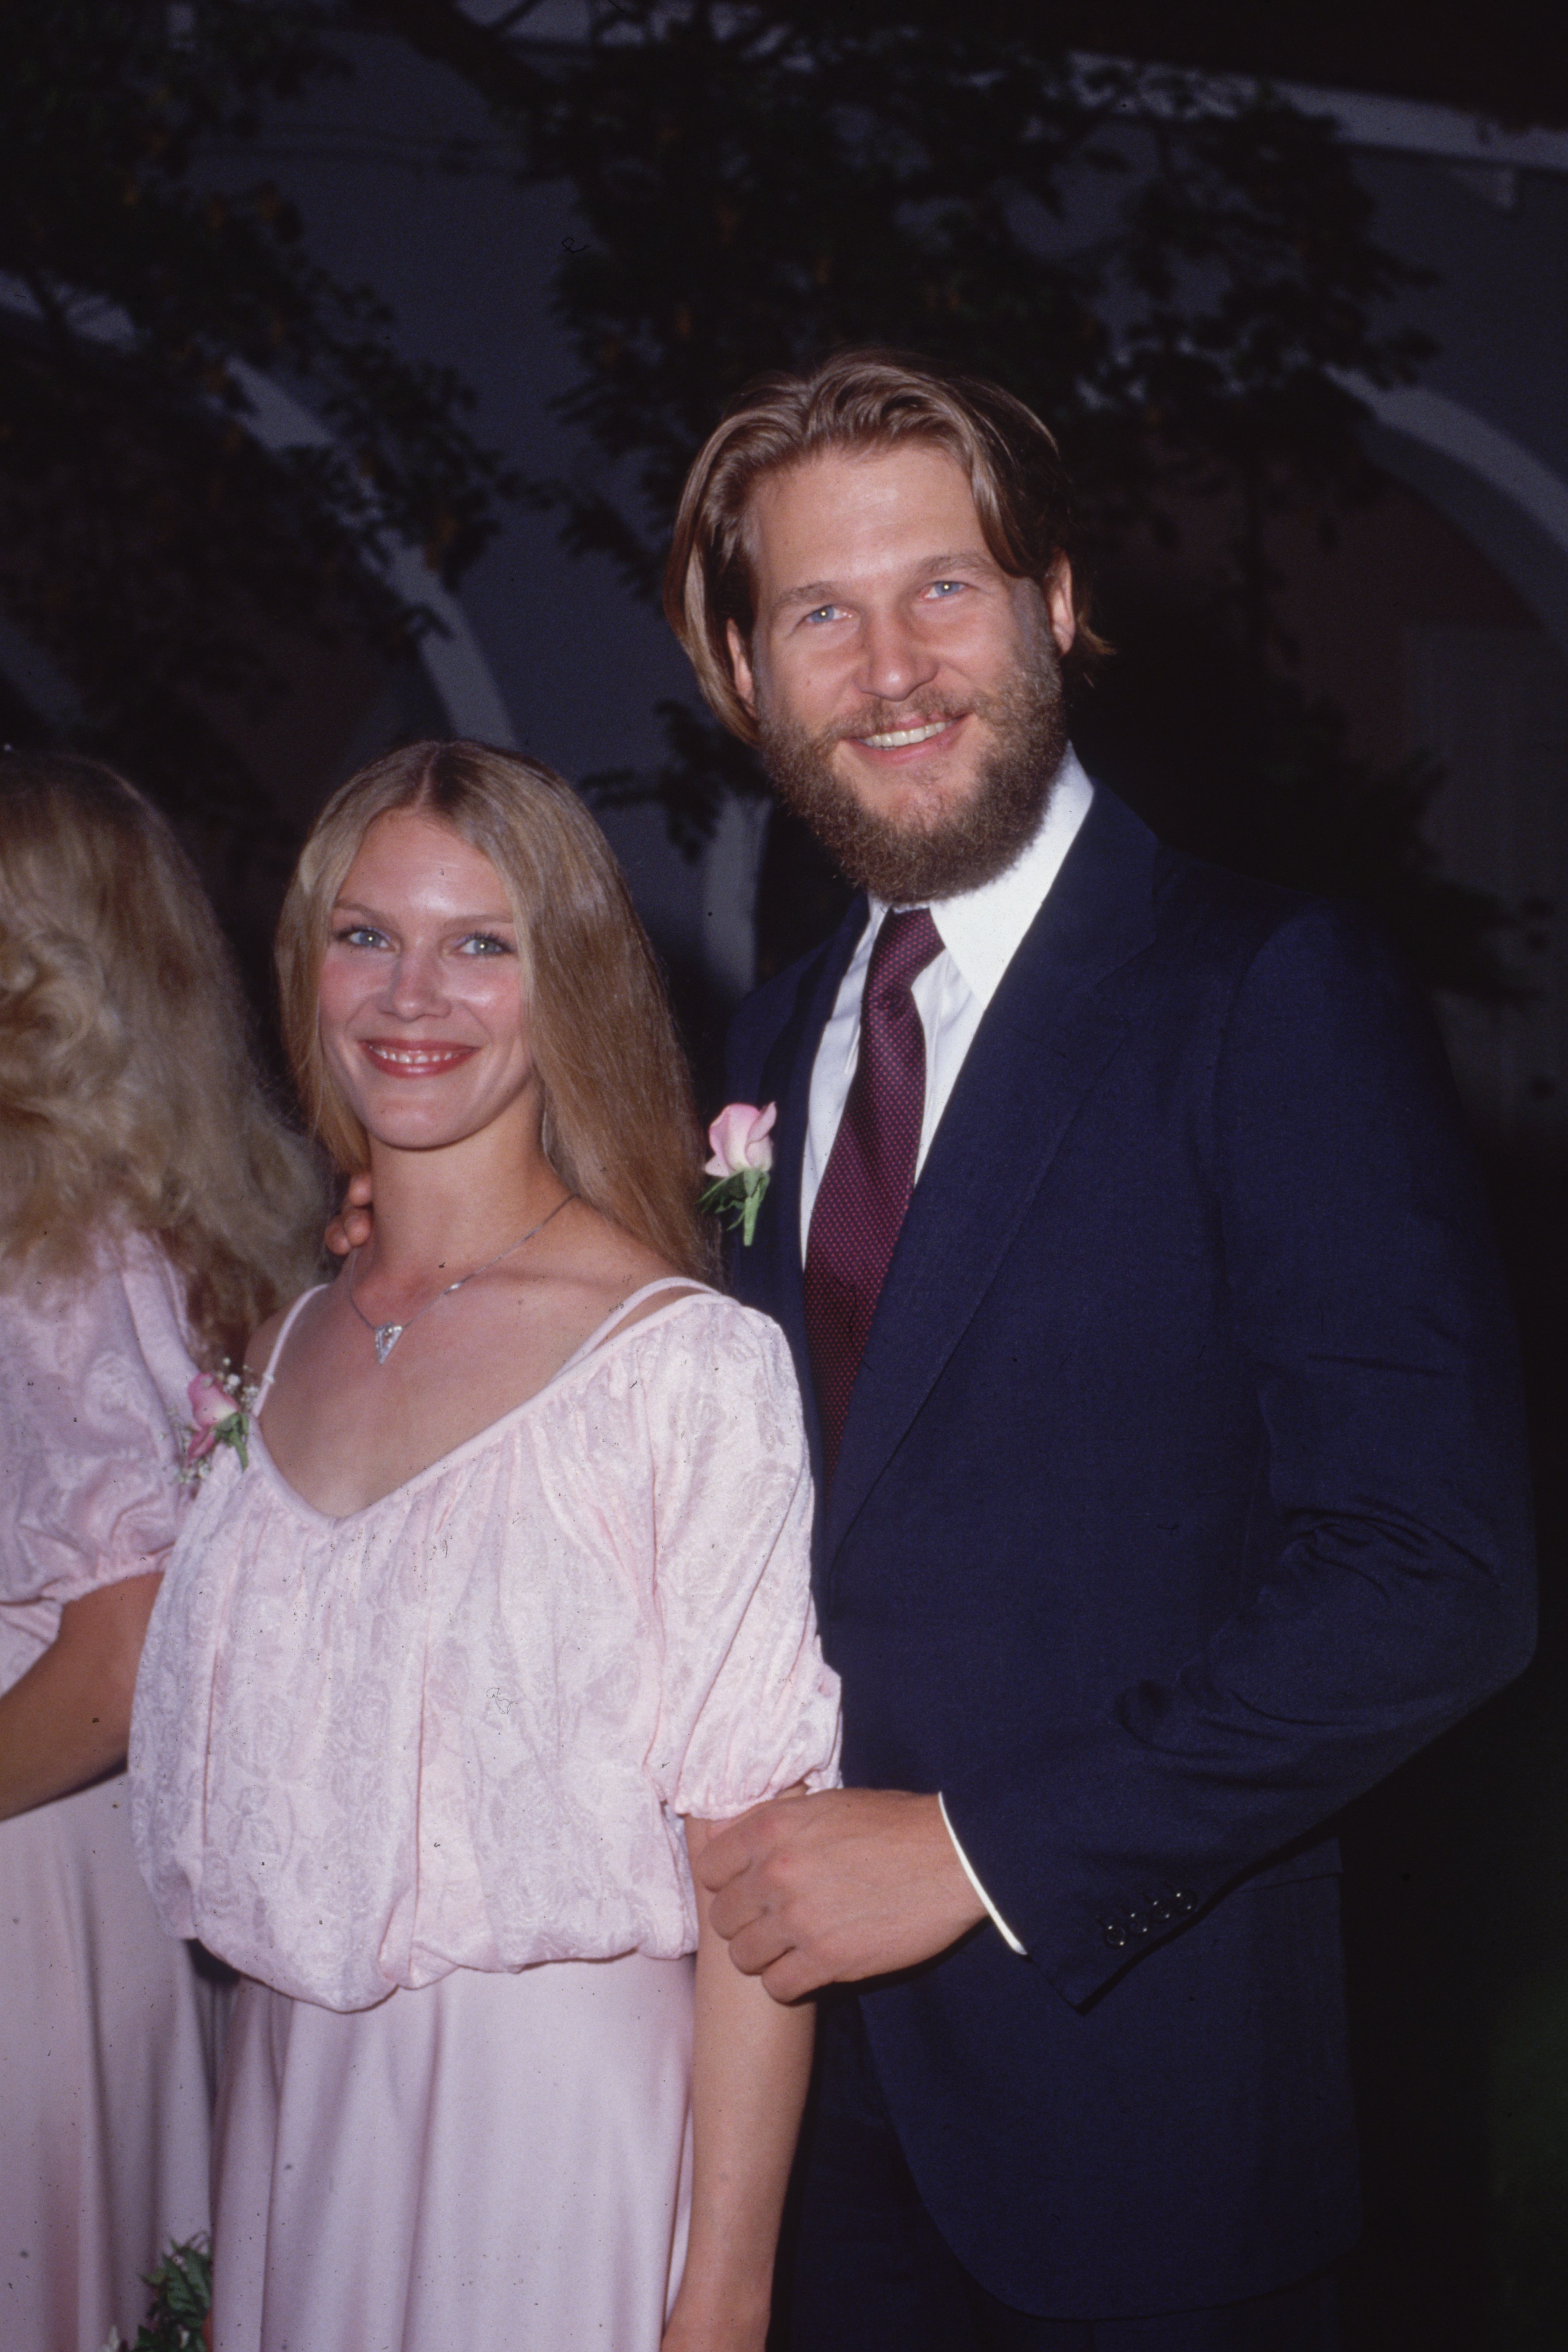 American actor Jeff Bridges and his wife, Susan Geston, smiling while at a formal event, circa 1978 | Source: Getty Images